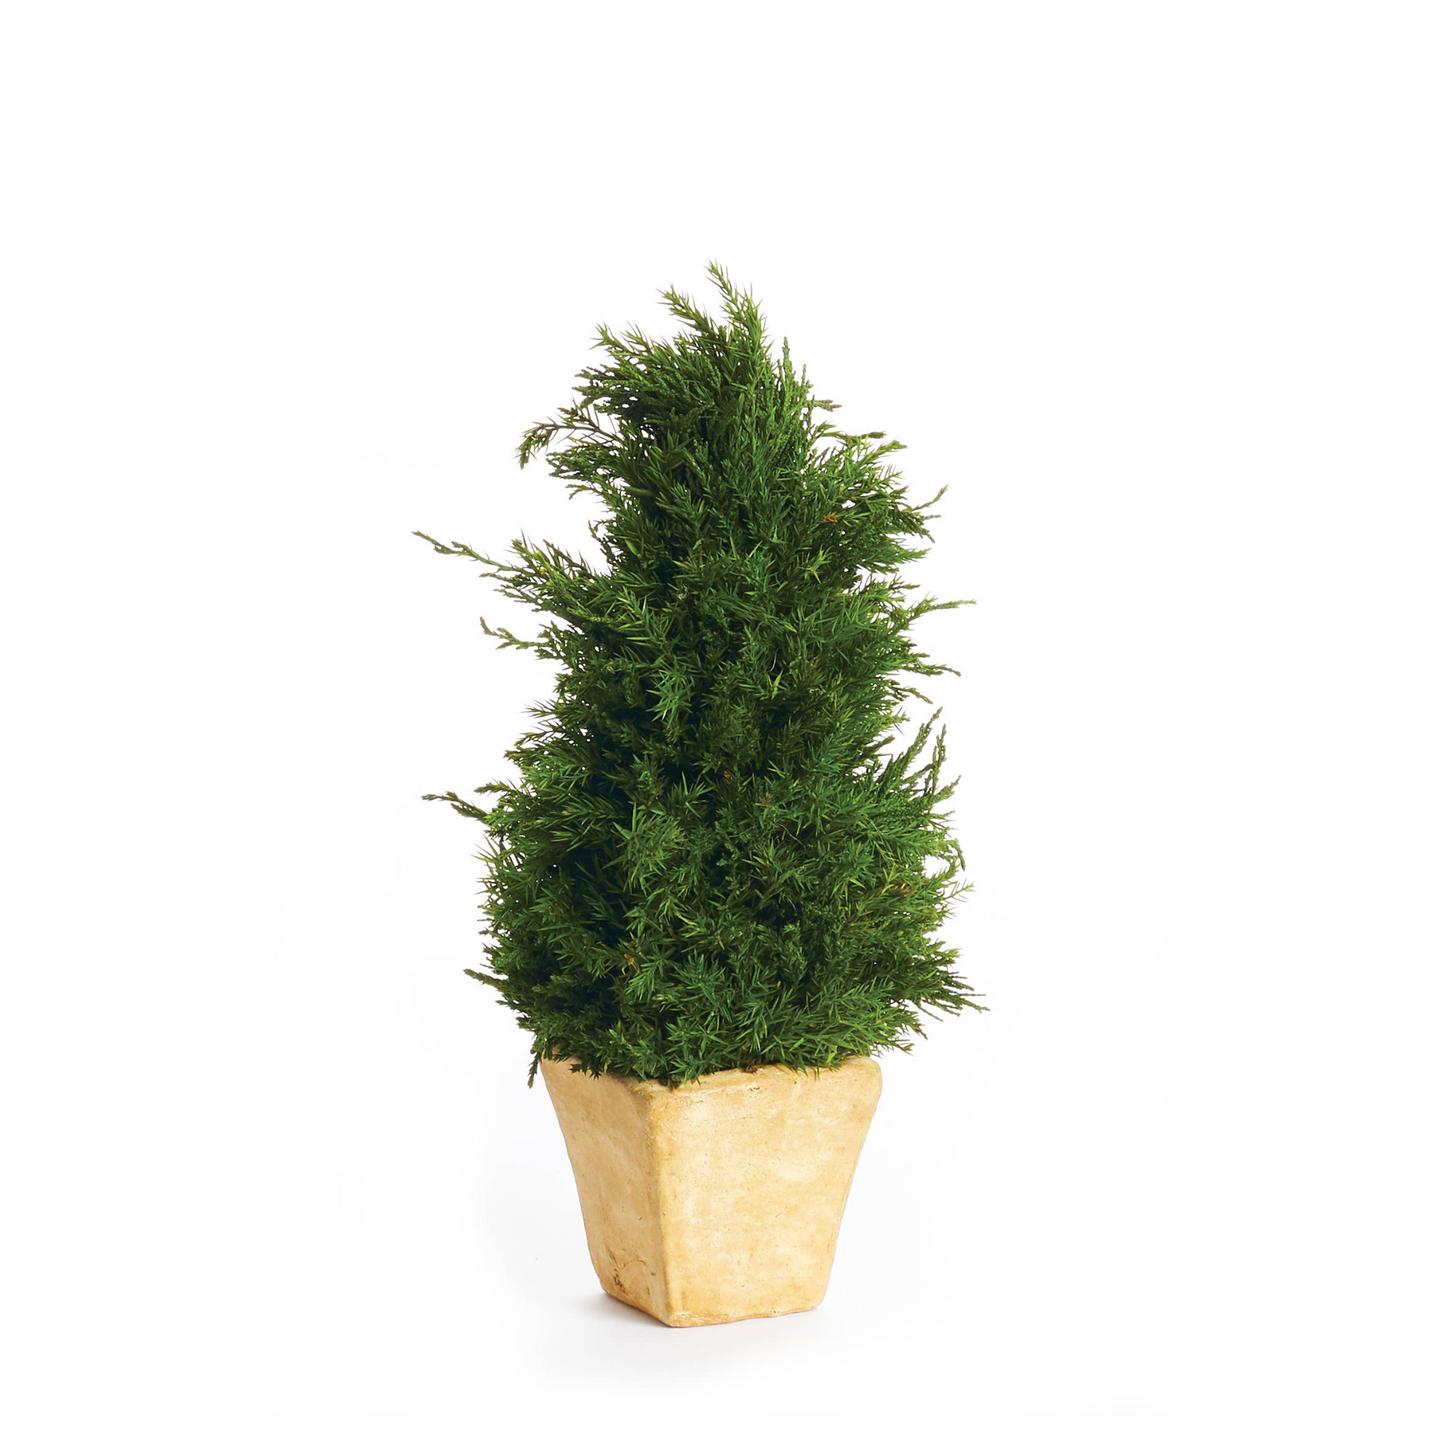 Cypress Cone Topiary In Pot